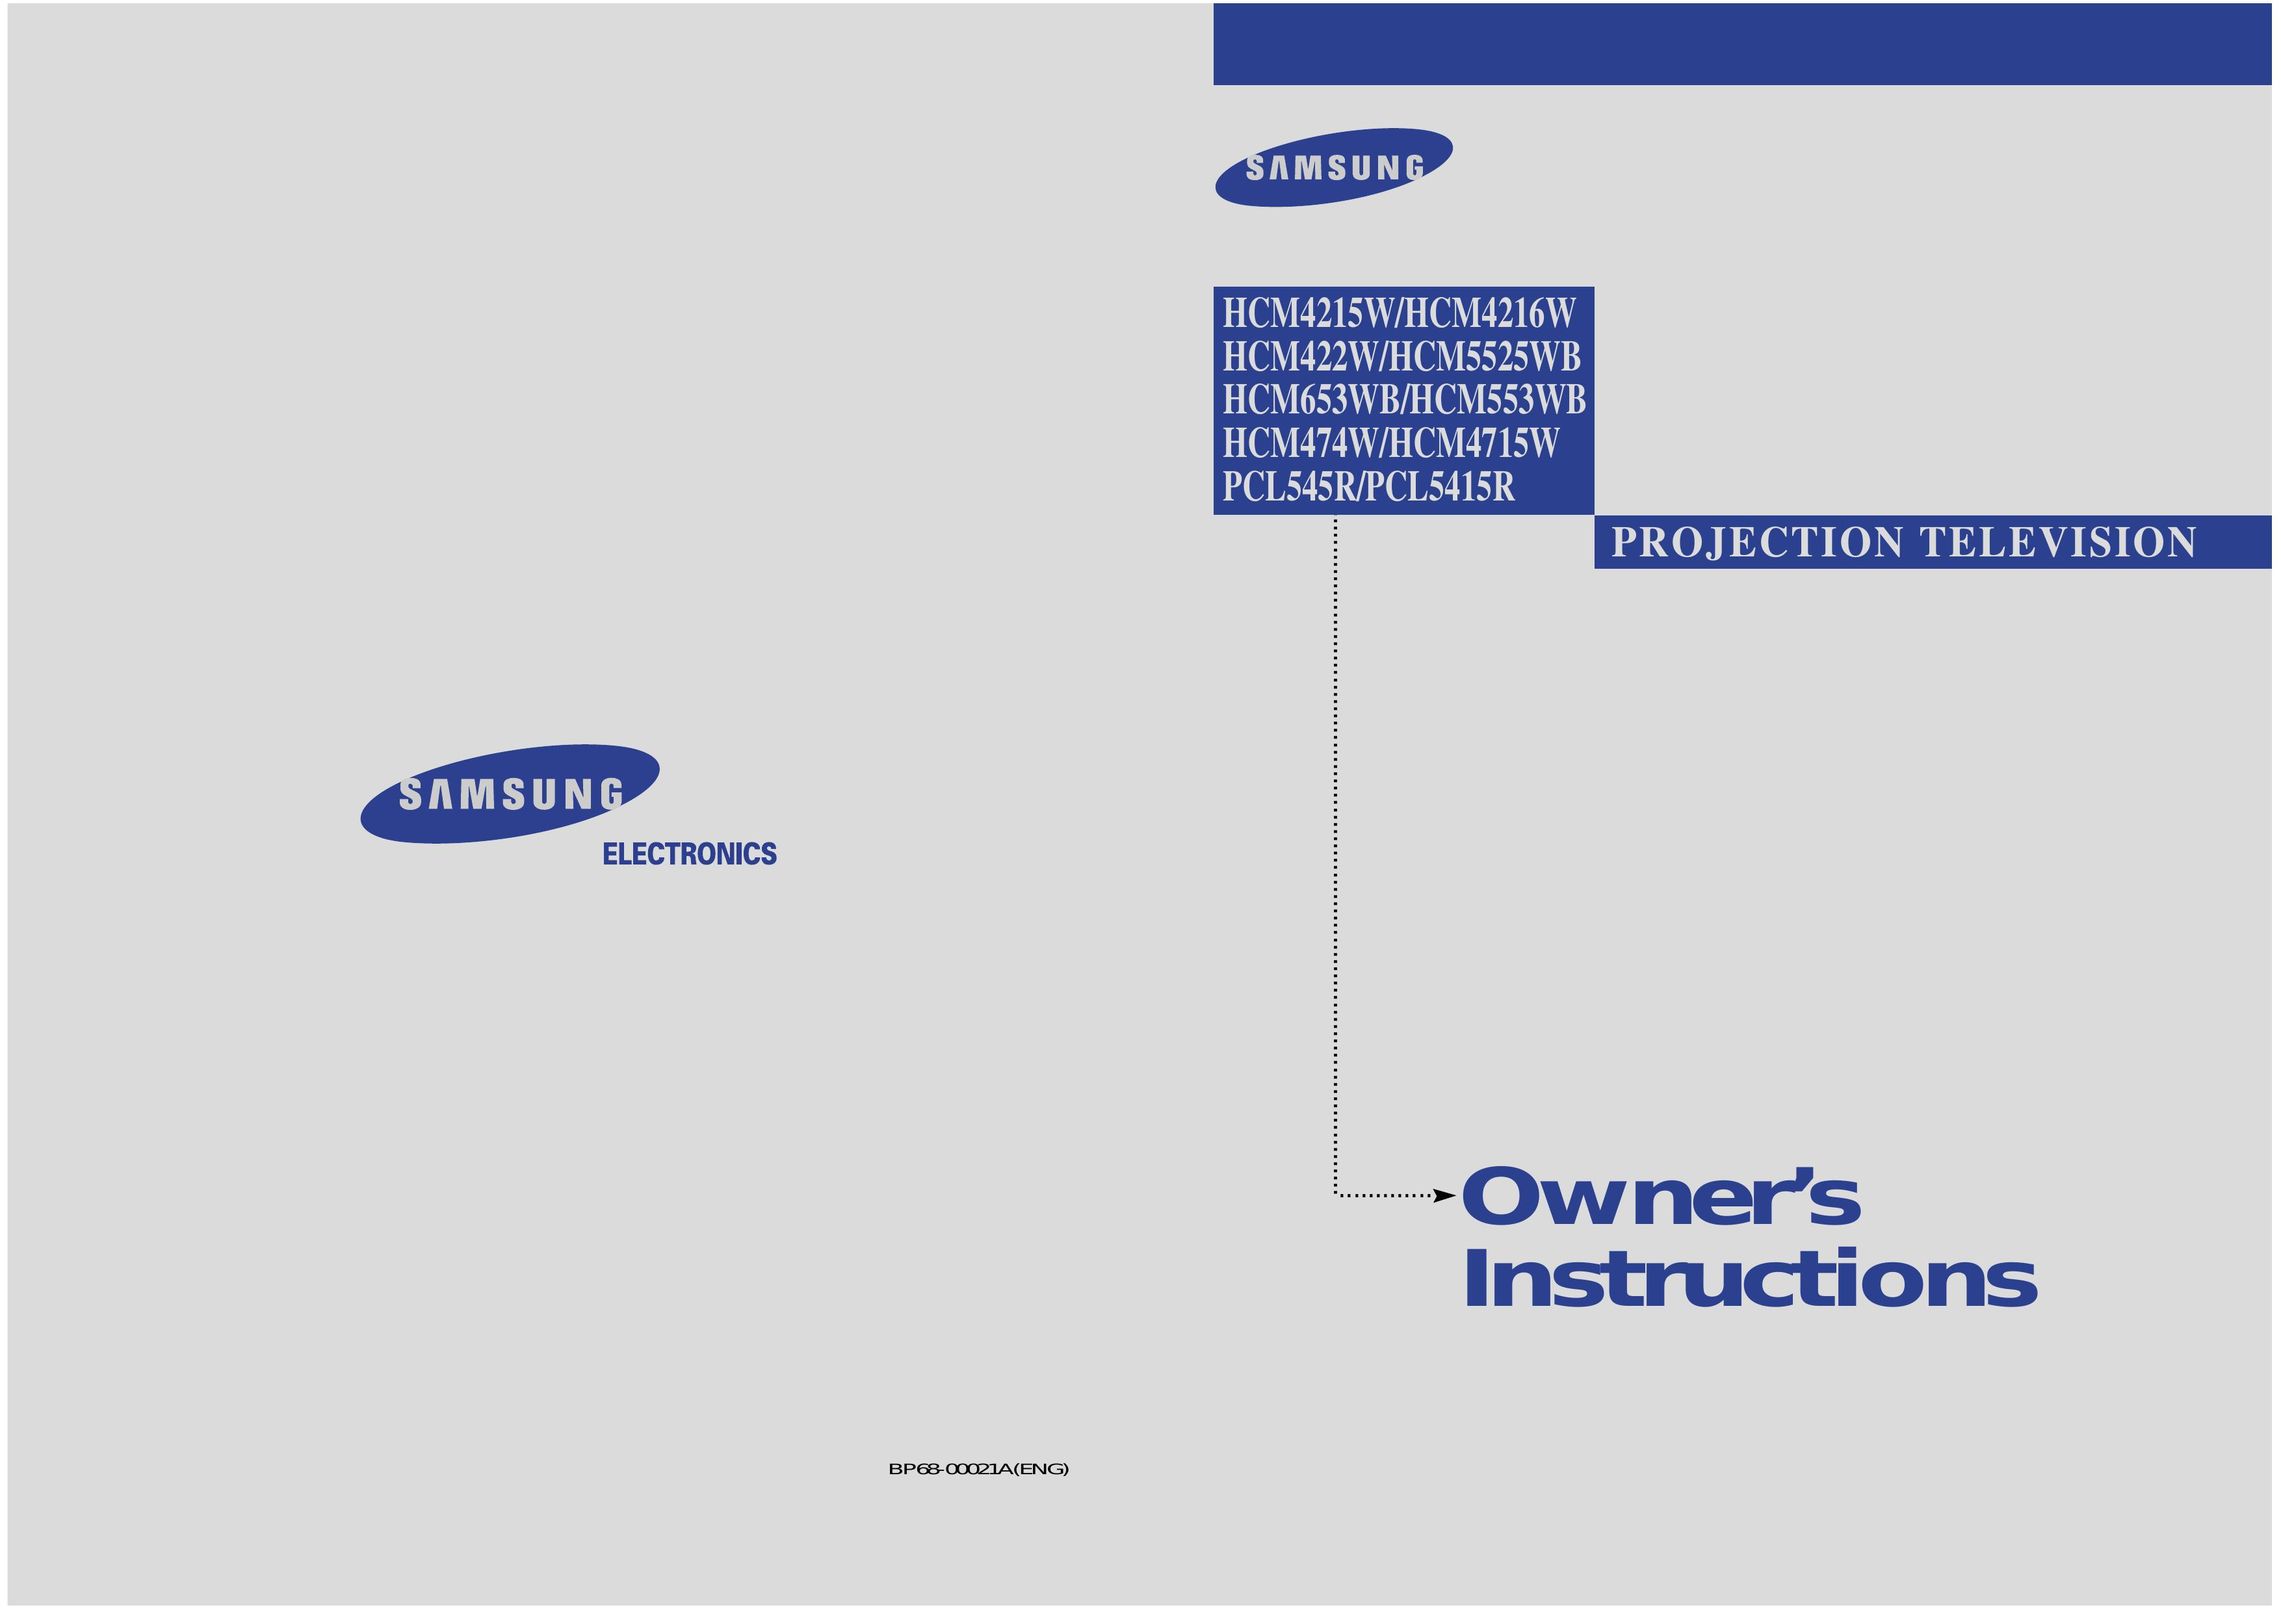 Samsung HCM 422W Projection Television User Manual